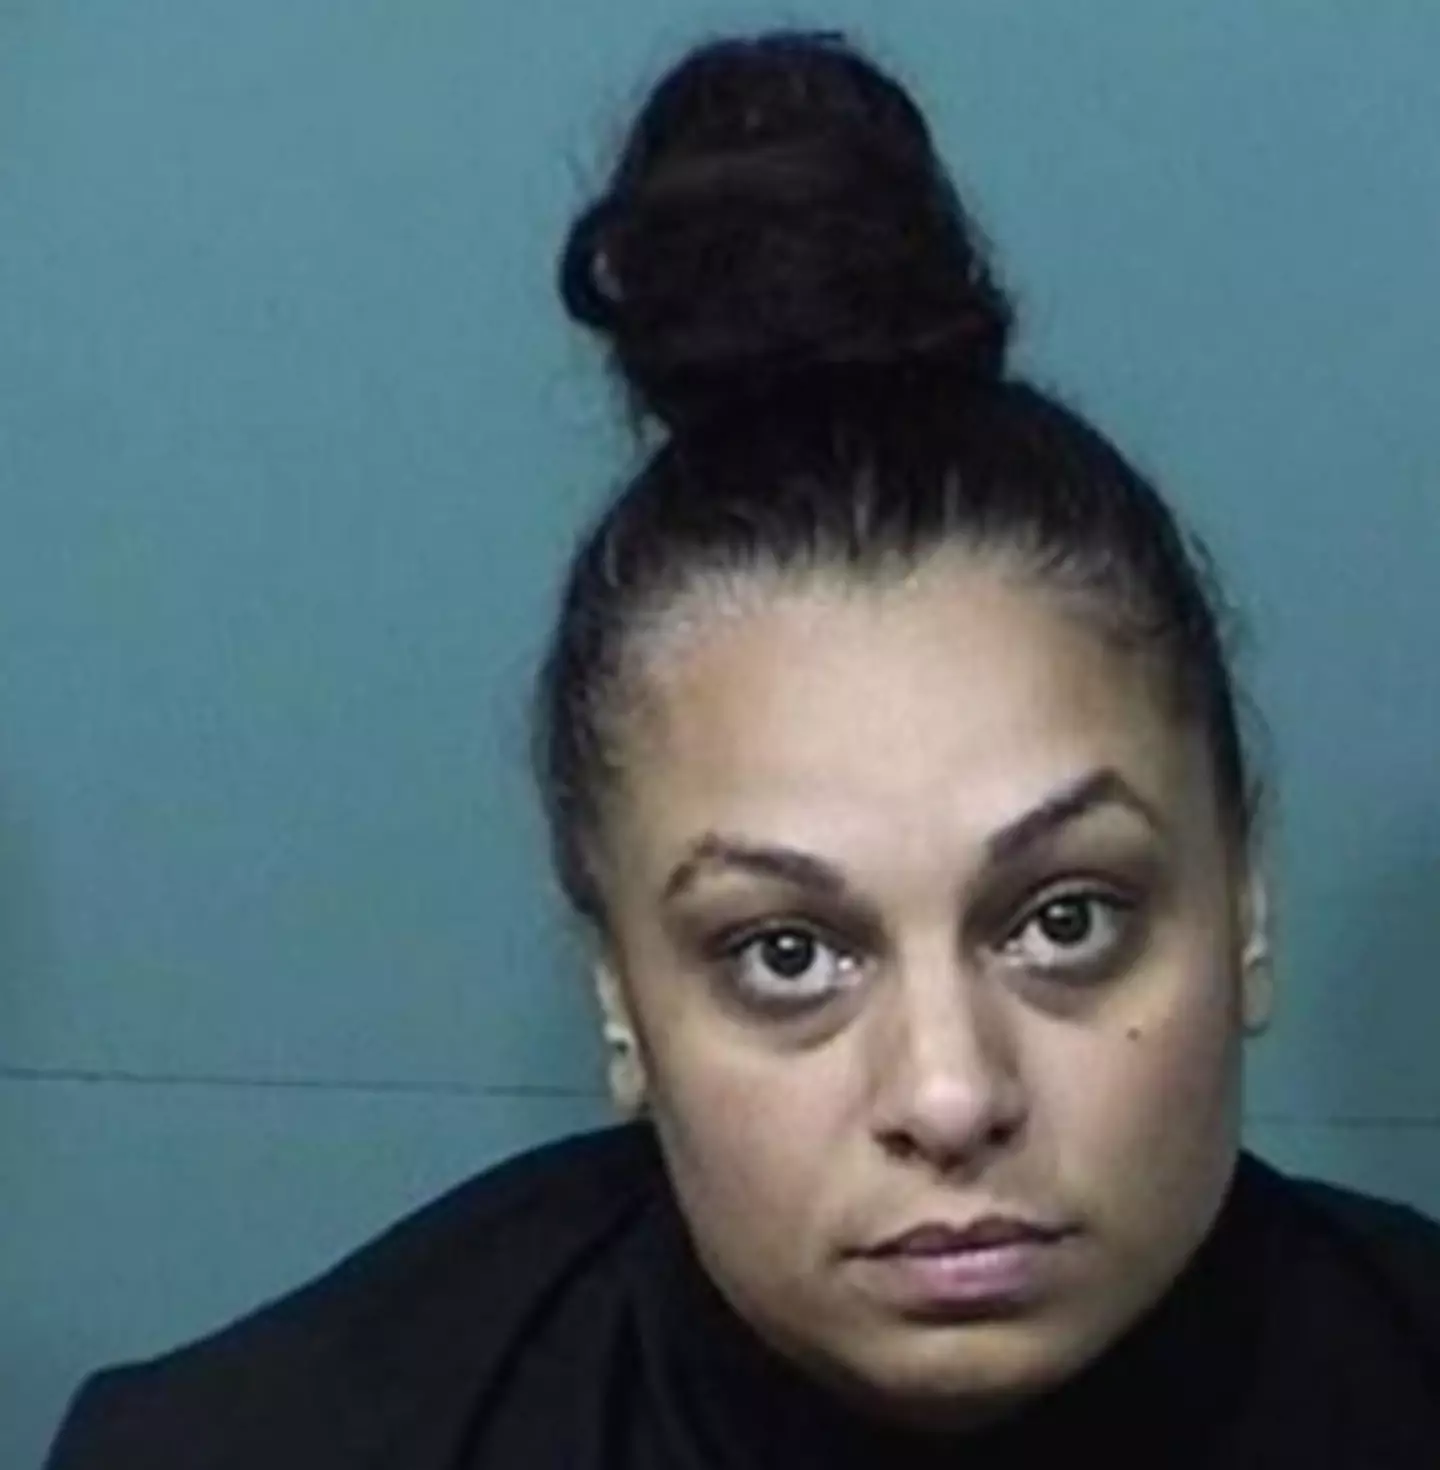 Tiffanimarie Pirozzi not only threatened to ‘blow up’ the school, but also said she’d ‘beat up’ its principal.